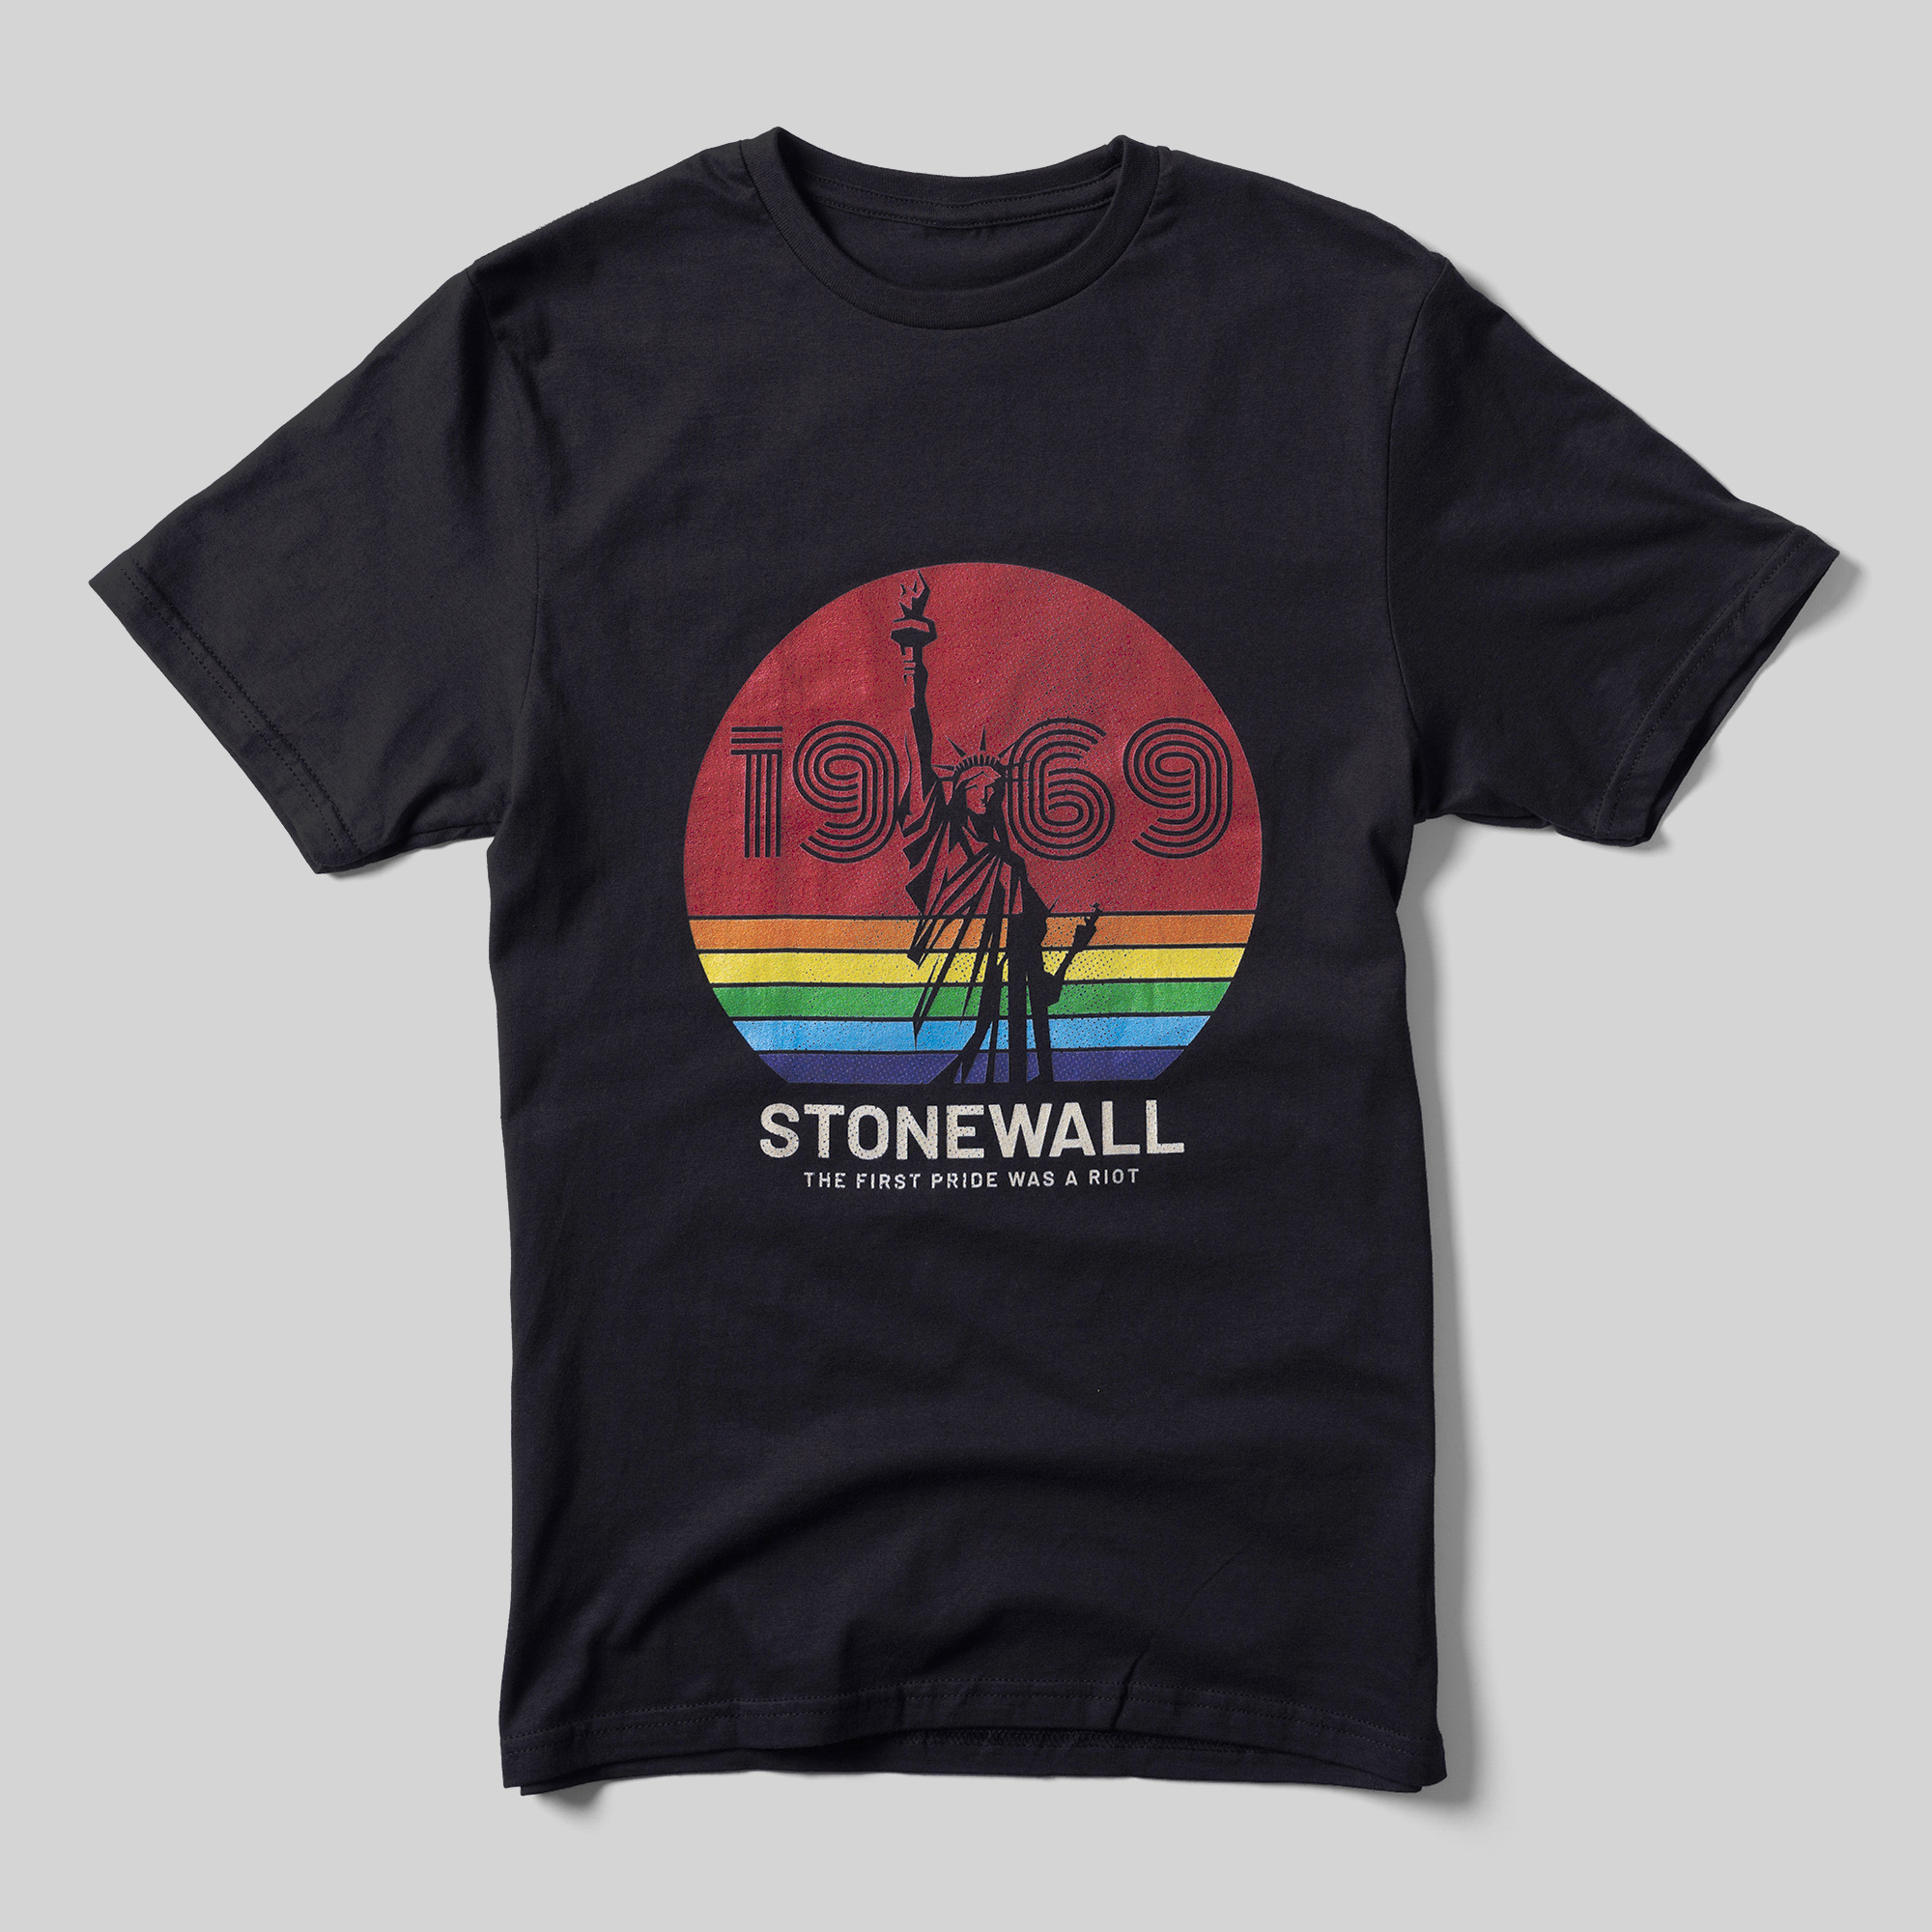 A black t-shirt that reads "1969" inside of a rainbow-colored circle with a black illustration of the Statue of Liberty. Beneath that reads "Stonewall The First Pride Was a Riot."